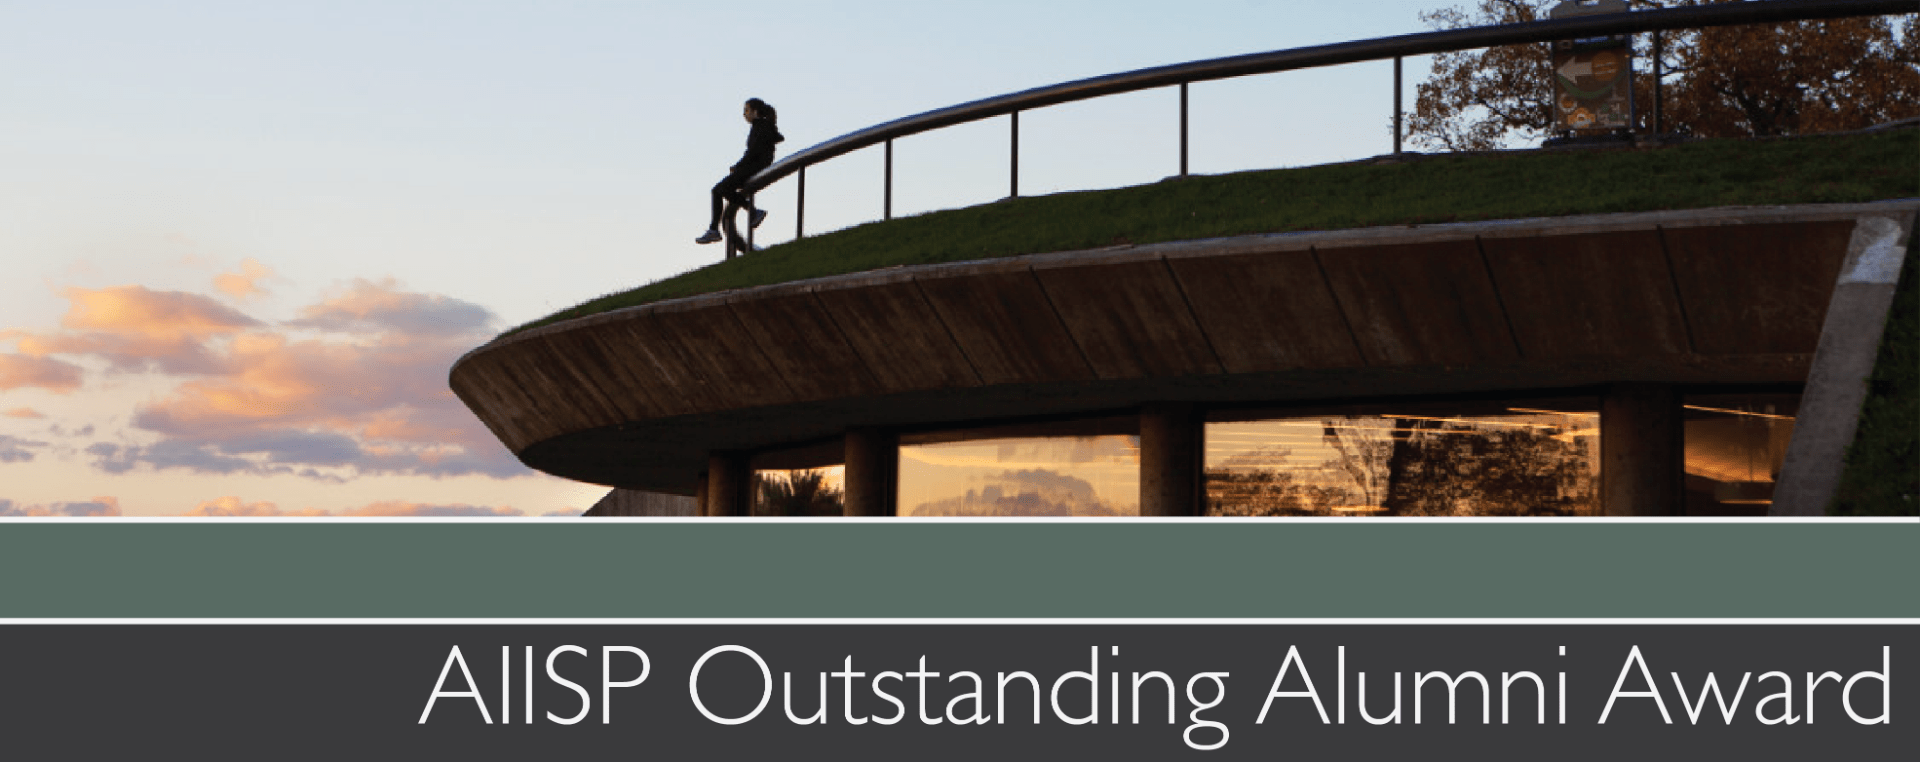 Banner with an image of a sunset with a person sitting on the edge of a circular building with text underneath which reads AIISP outstanding alumni award.